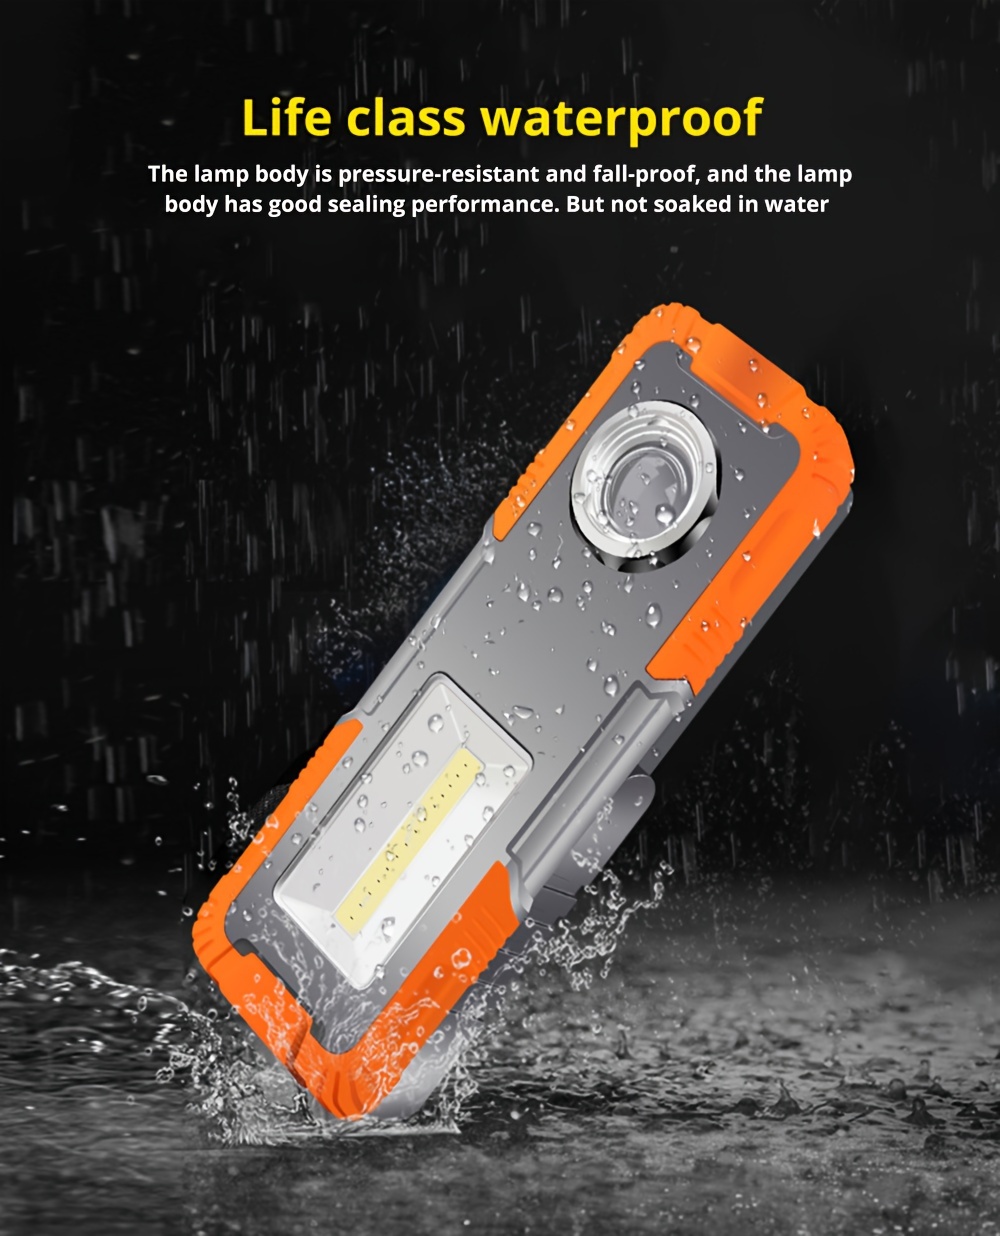 1pc multifunctional cob work light usb rechargeable led flashlight portable magnet hook design waterproof outdoor lantern powerful 3 modes torch suit for camping hiking fishing hunting emergency lighting details 12